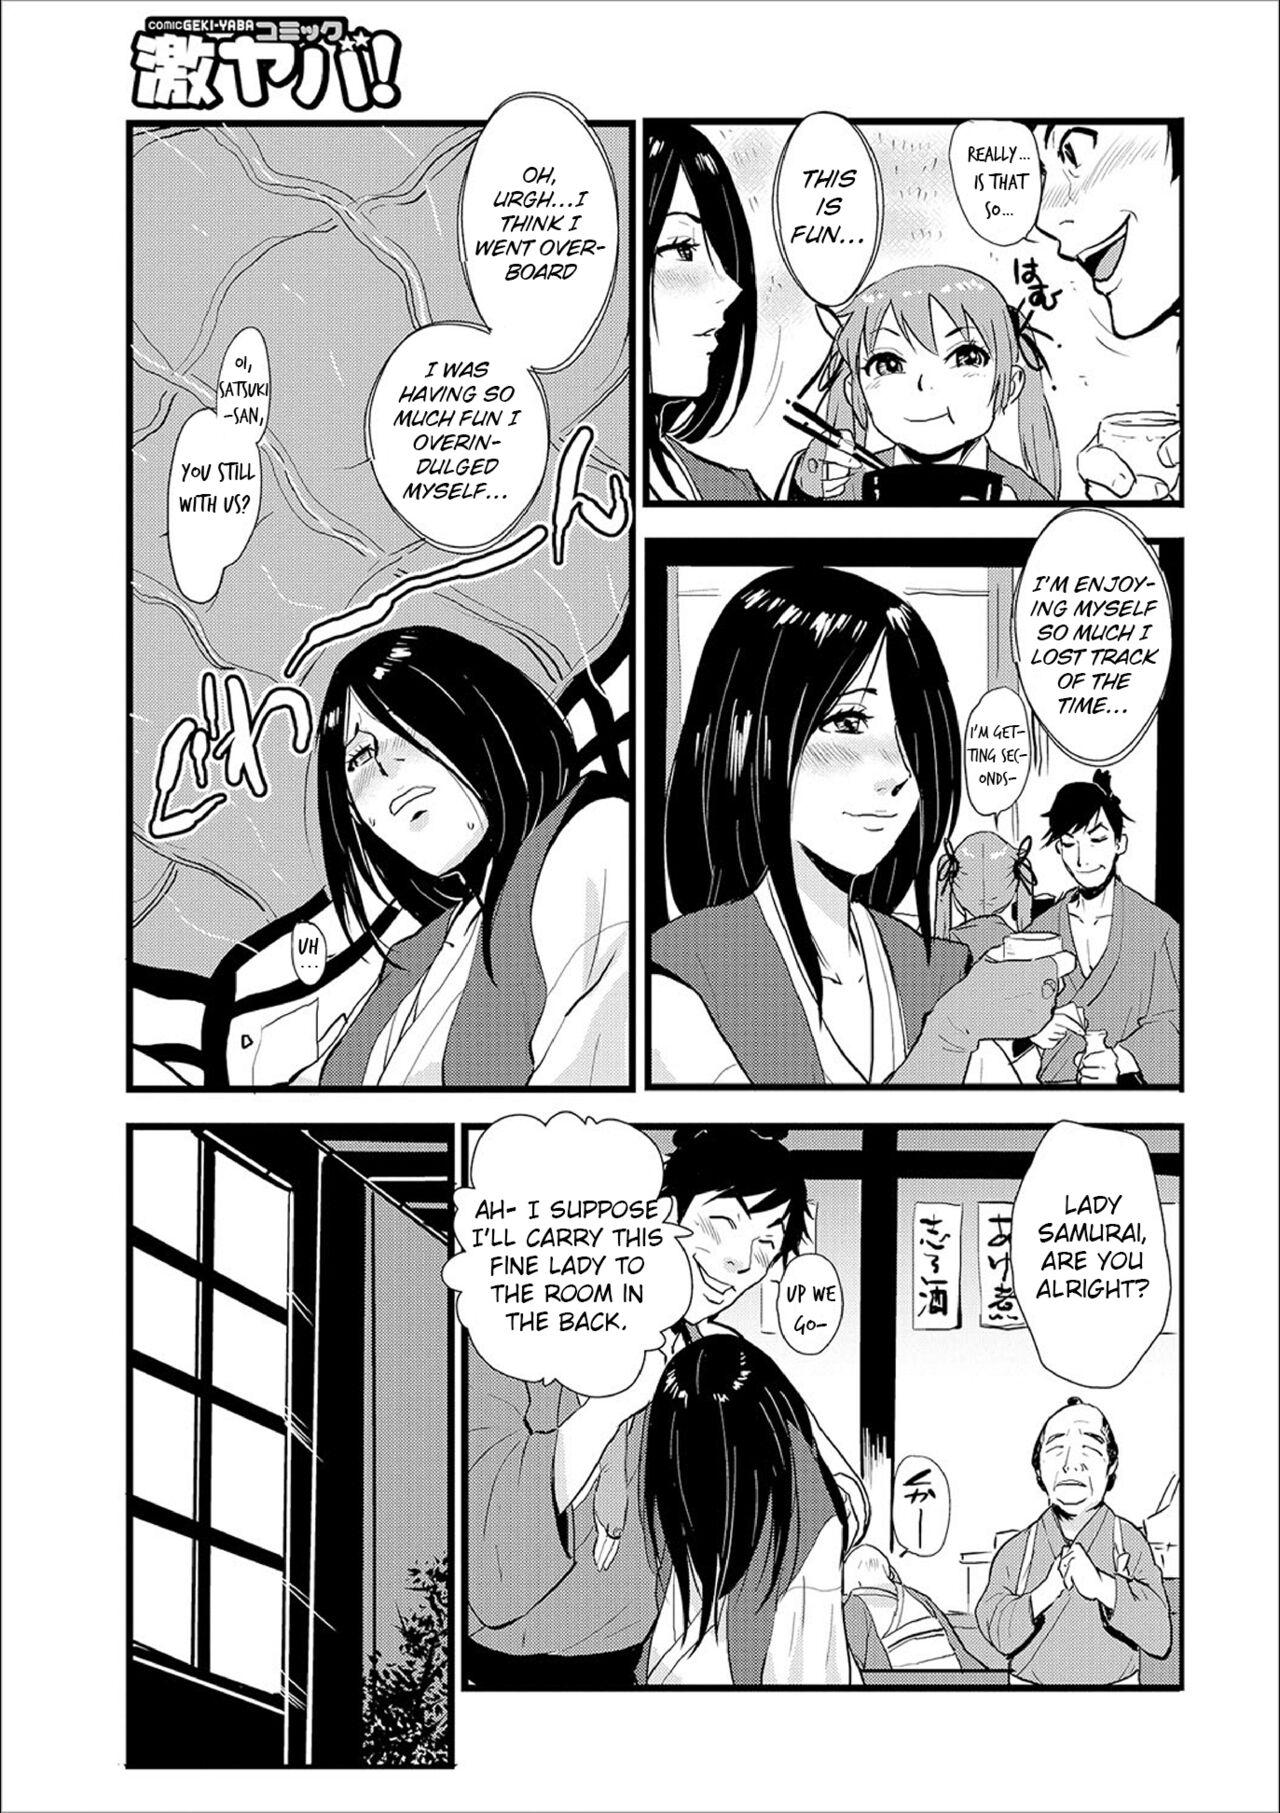 Knocked Up Samurai 02: The Post Town and the Ronin, Tied and Teased 8